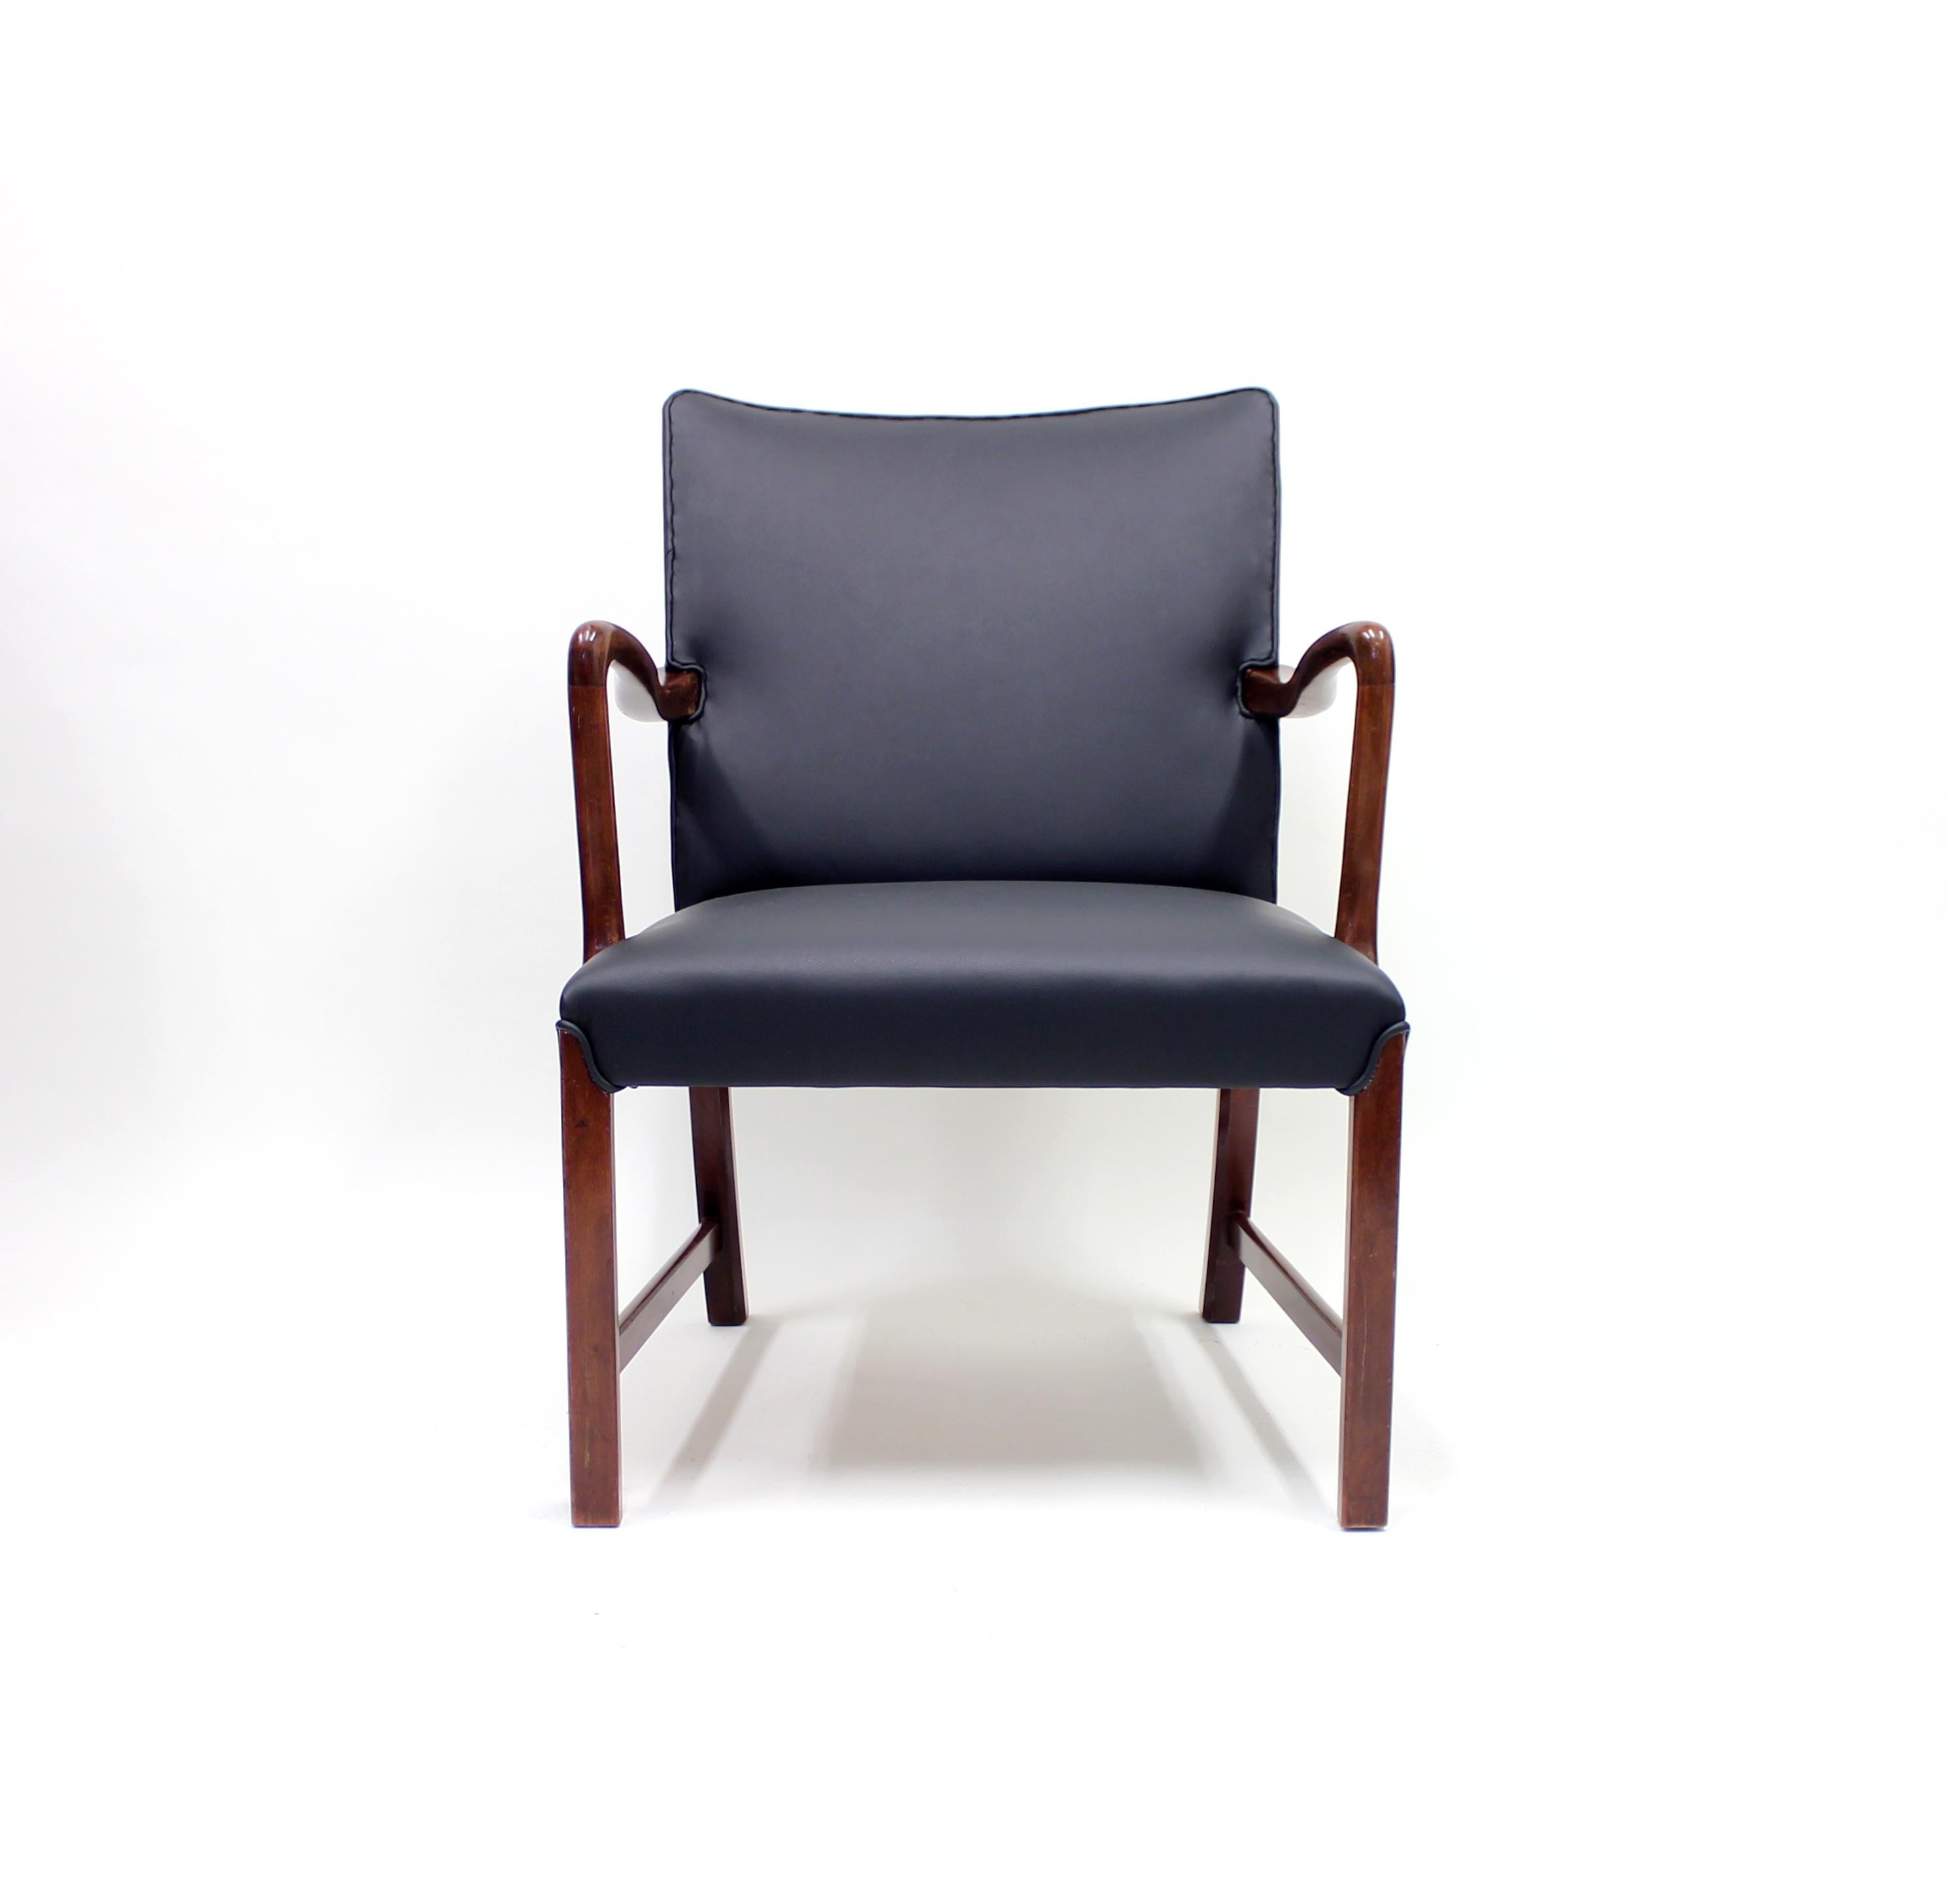 Mid-20th Century Danish 1756 Easy Chair by Ole Wanscher for Fritz Hansen, 1940s